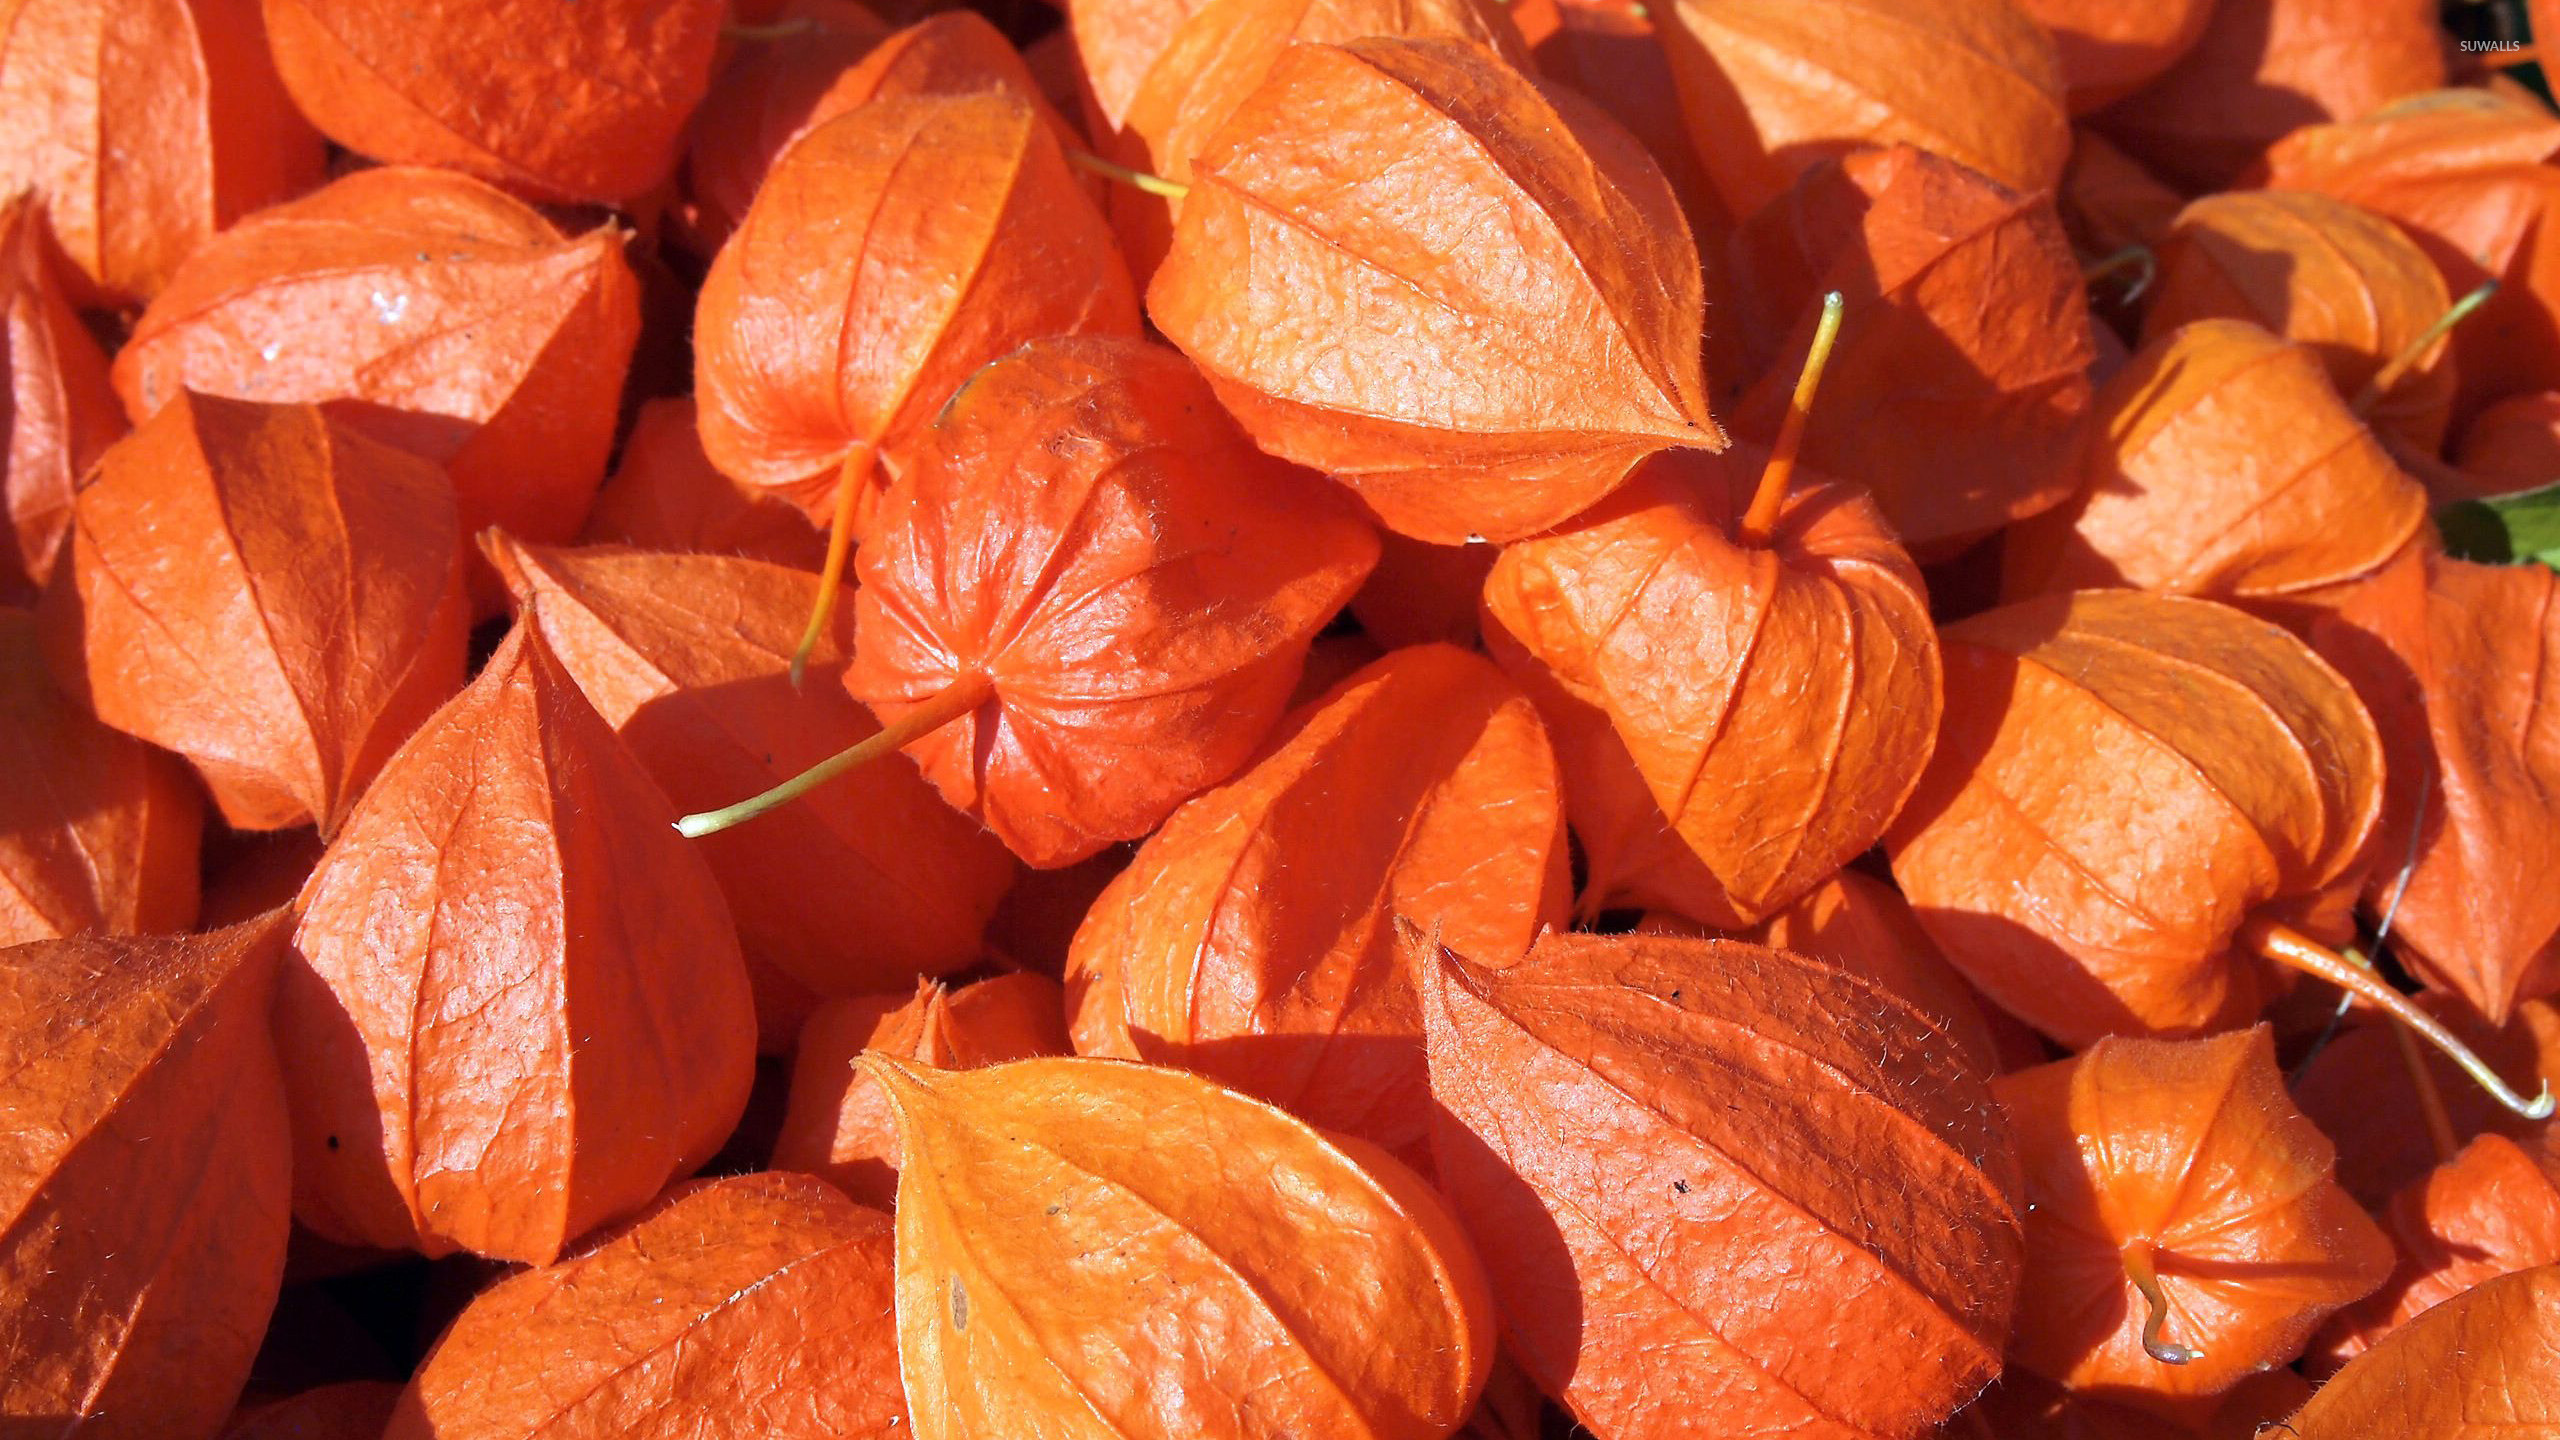 Physalis: A small round orange berry in a papery outer covering. 2560x1440 HD Wallpaper.